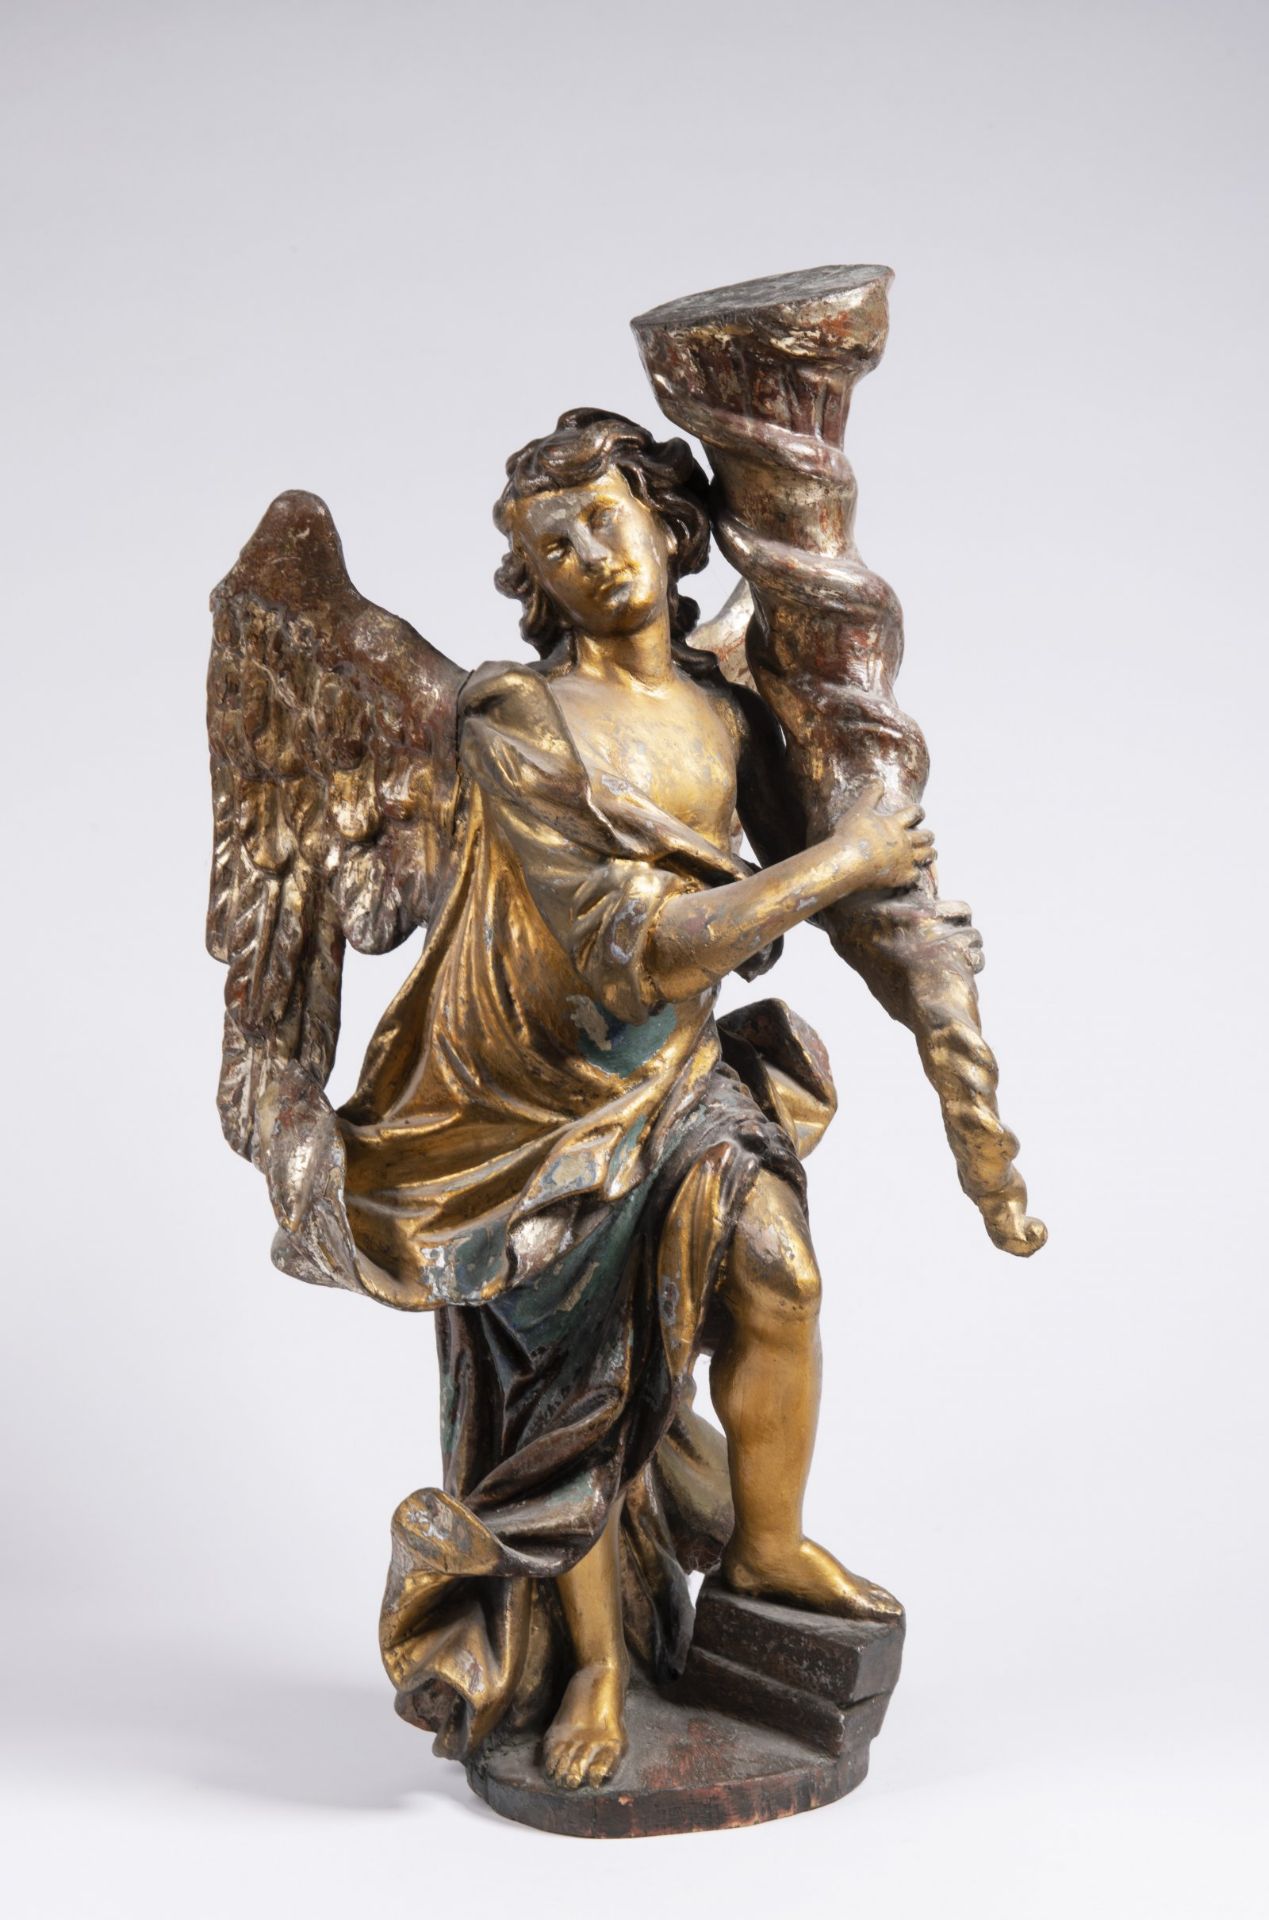 ANGEL - TORCHBEARER 18th century Central Europe Polychrome and gilded wood 58 cm A tall statuette of